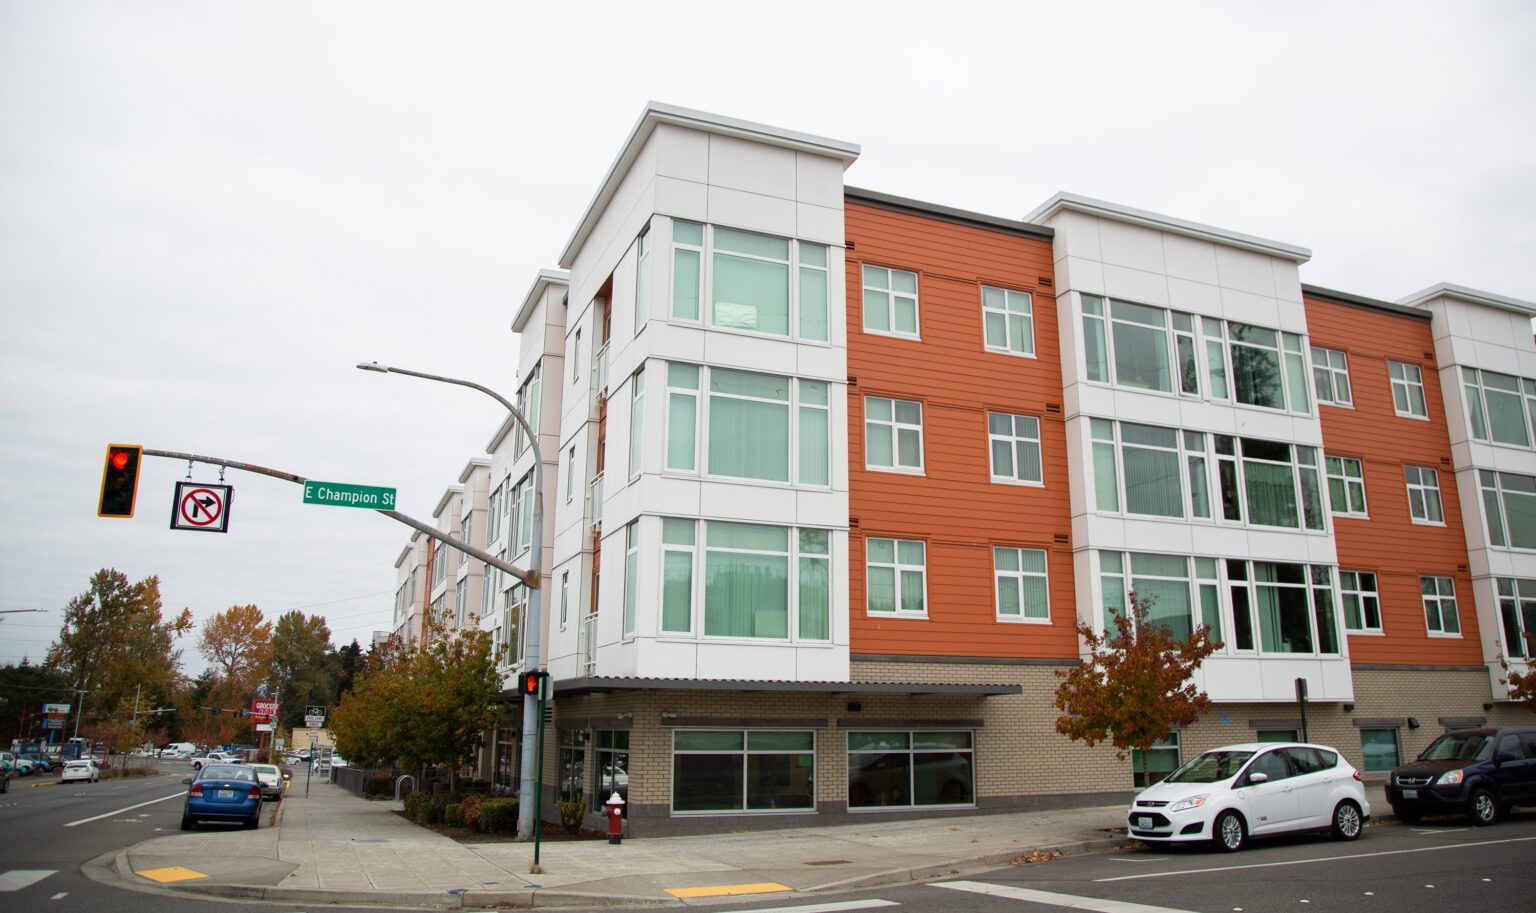 Bellingham invests $10 million a year on housing programs